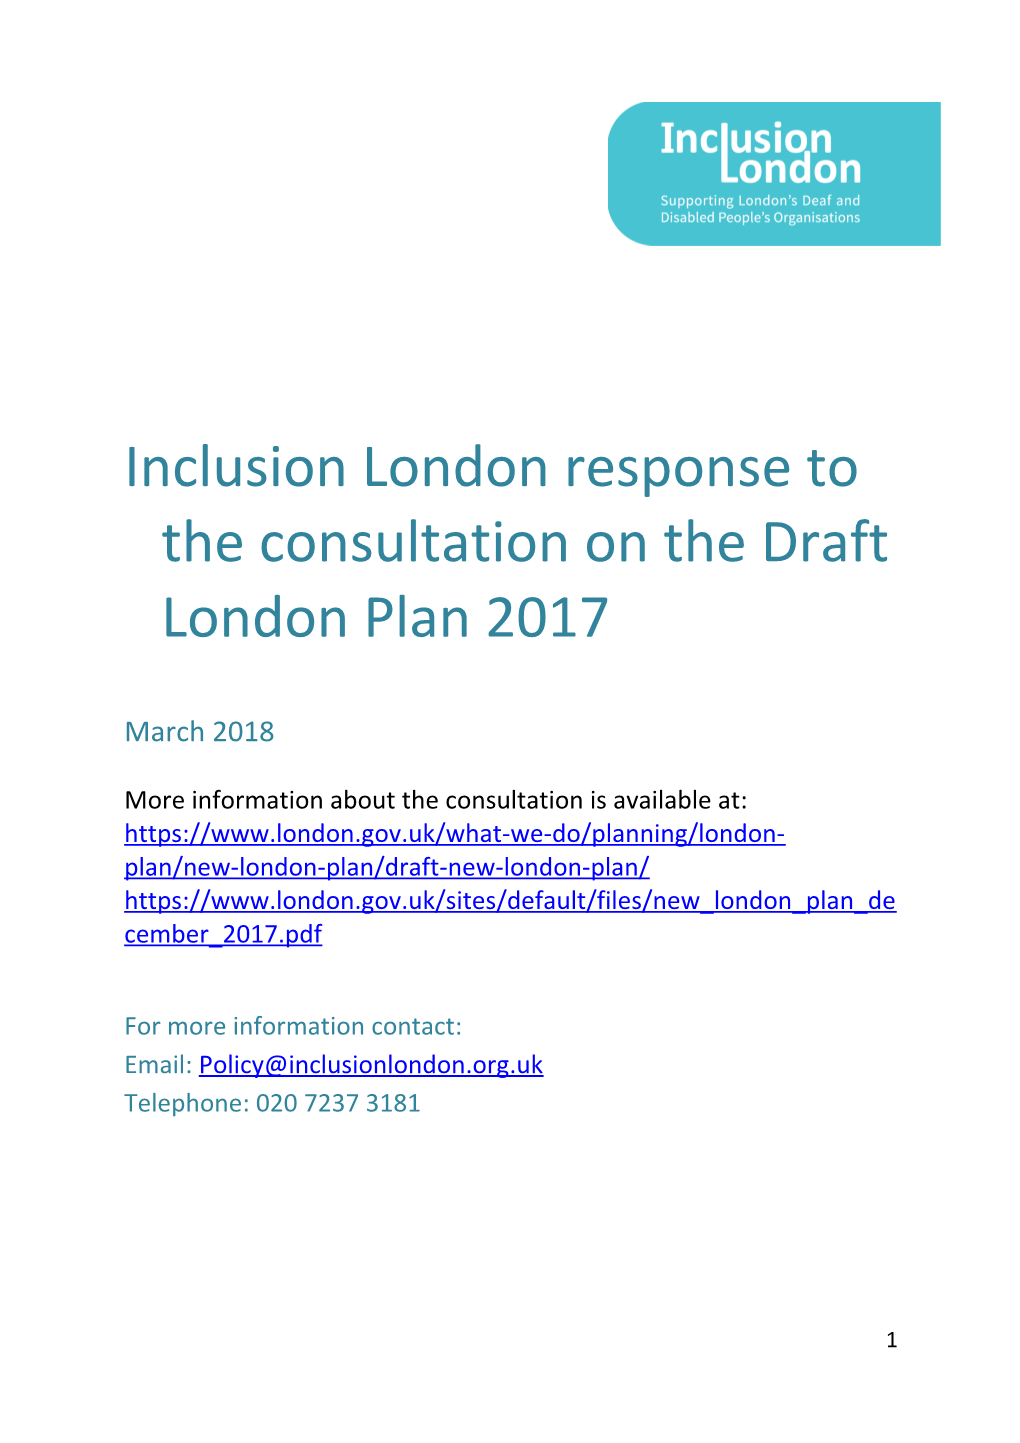 Inclusion London Response to the Consultation on the Draft London Plan 2017